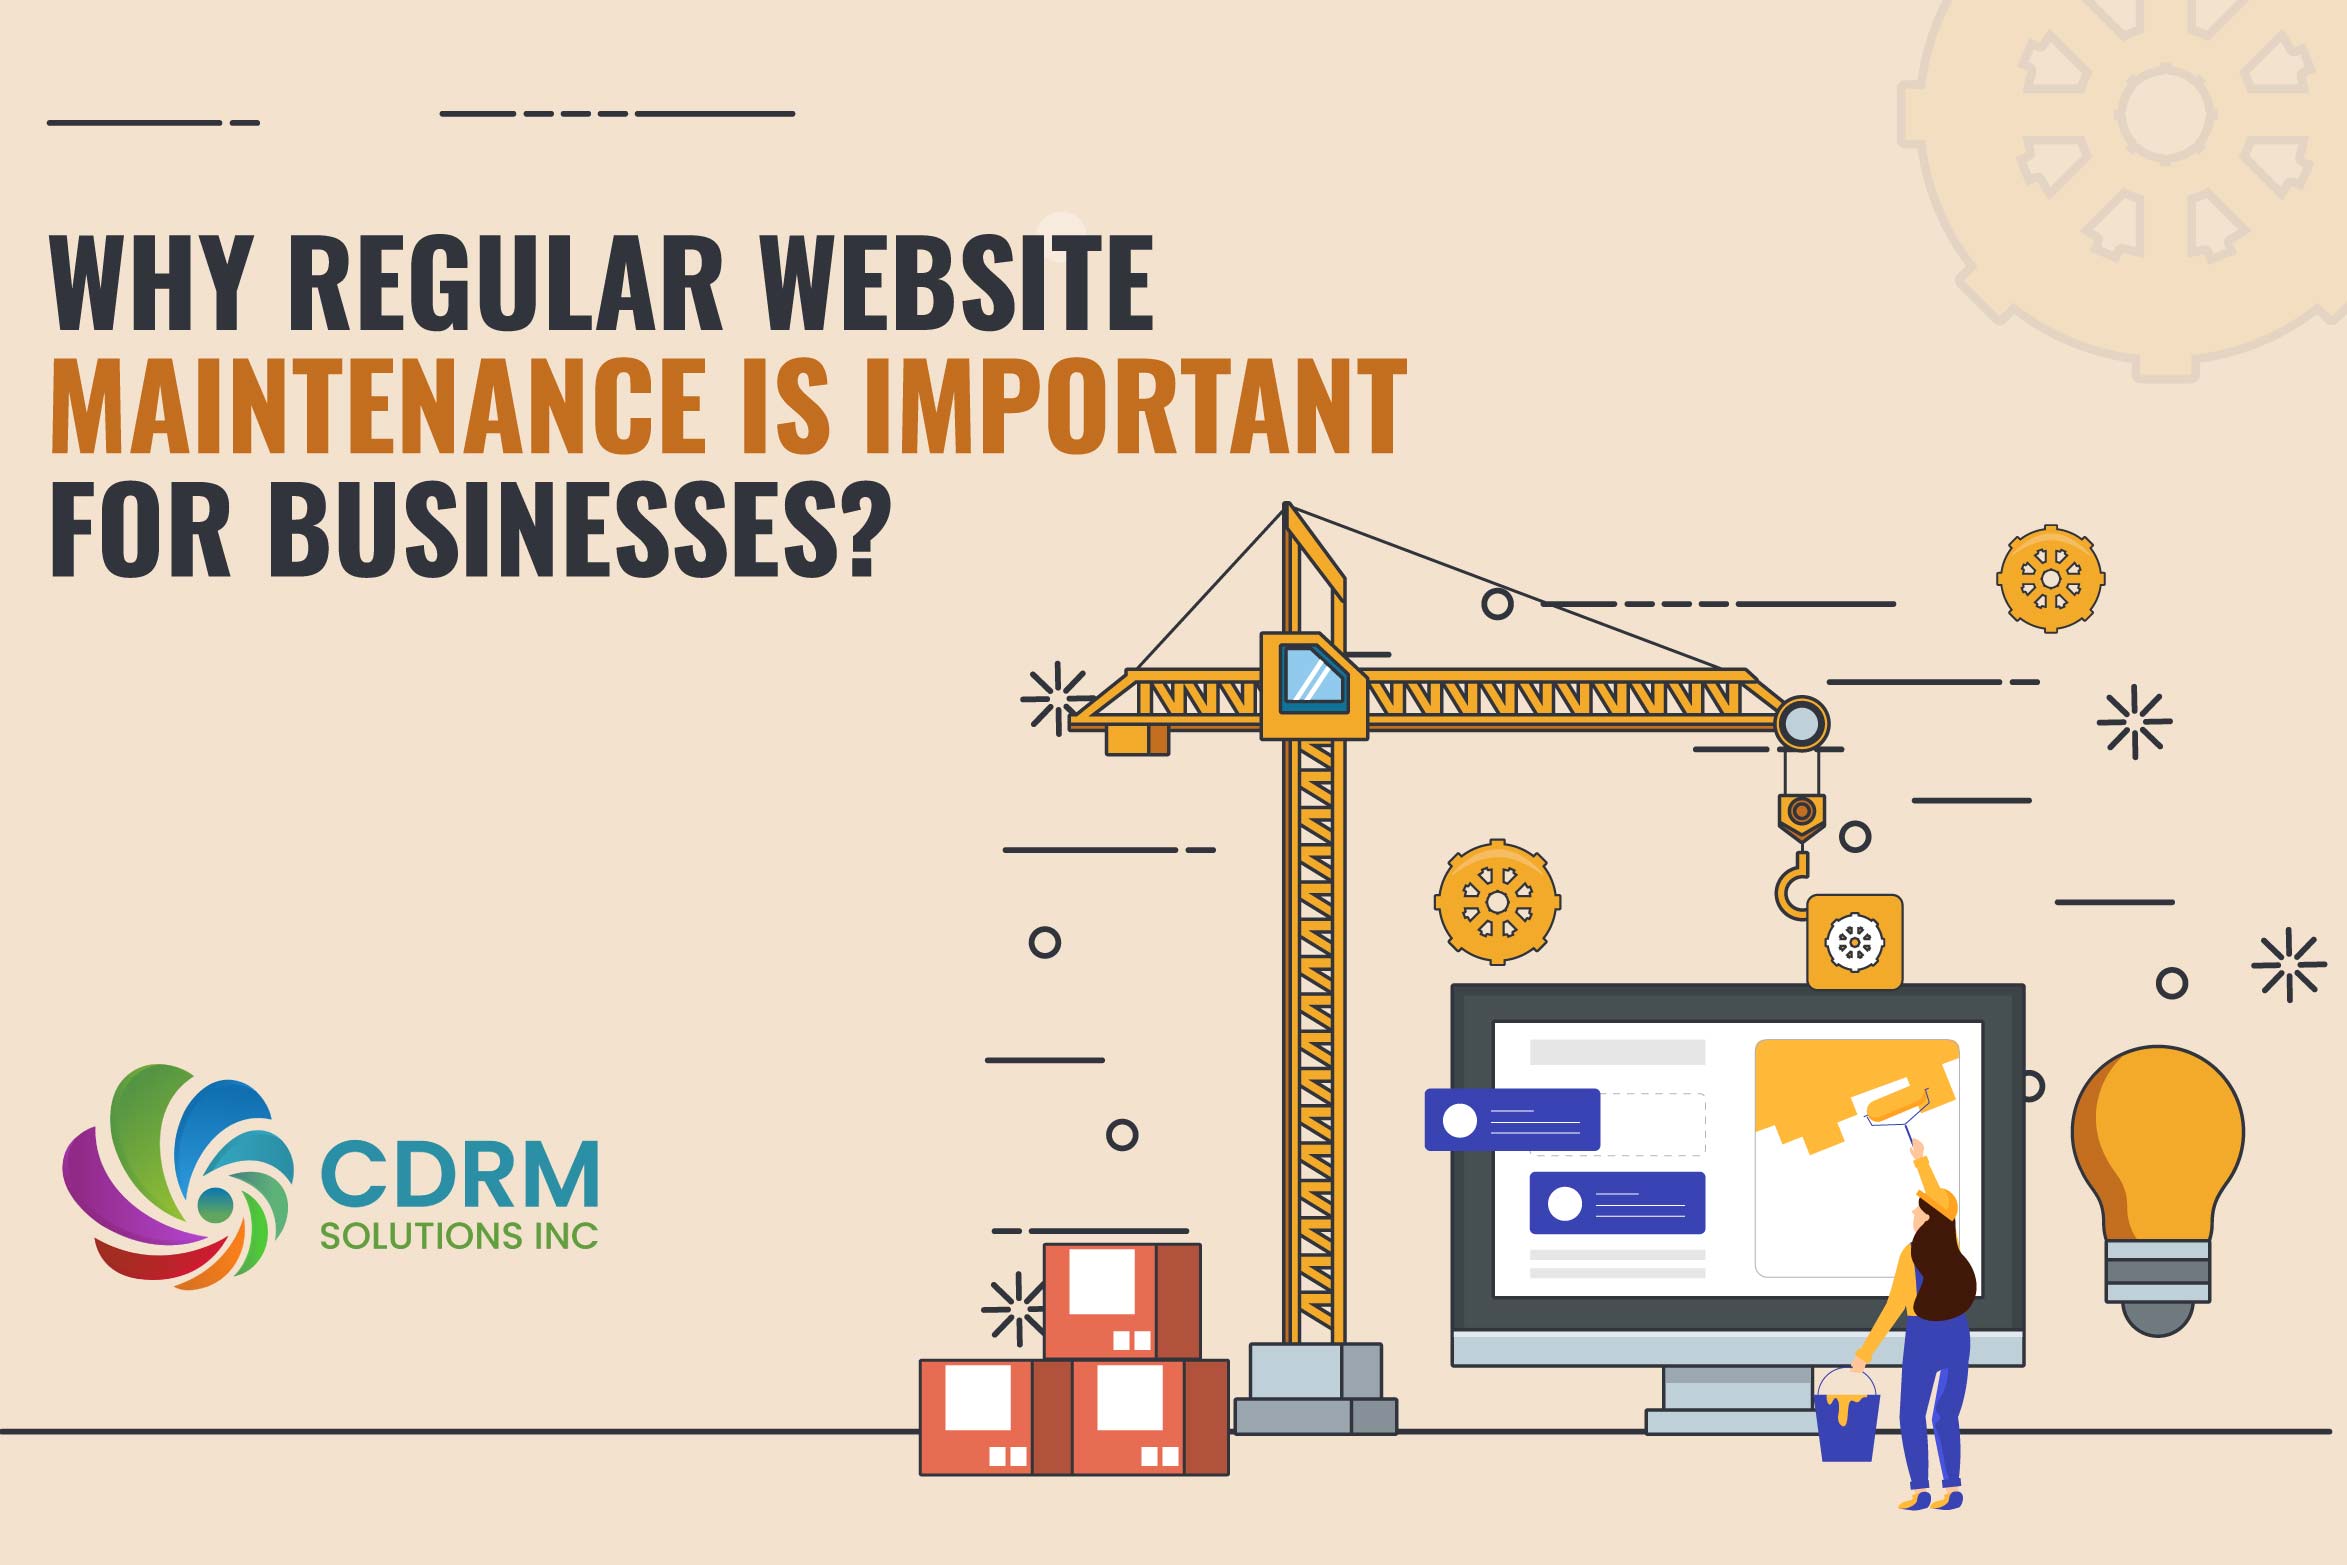 Why Regular Website Maintenance is Important for businesses?